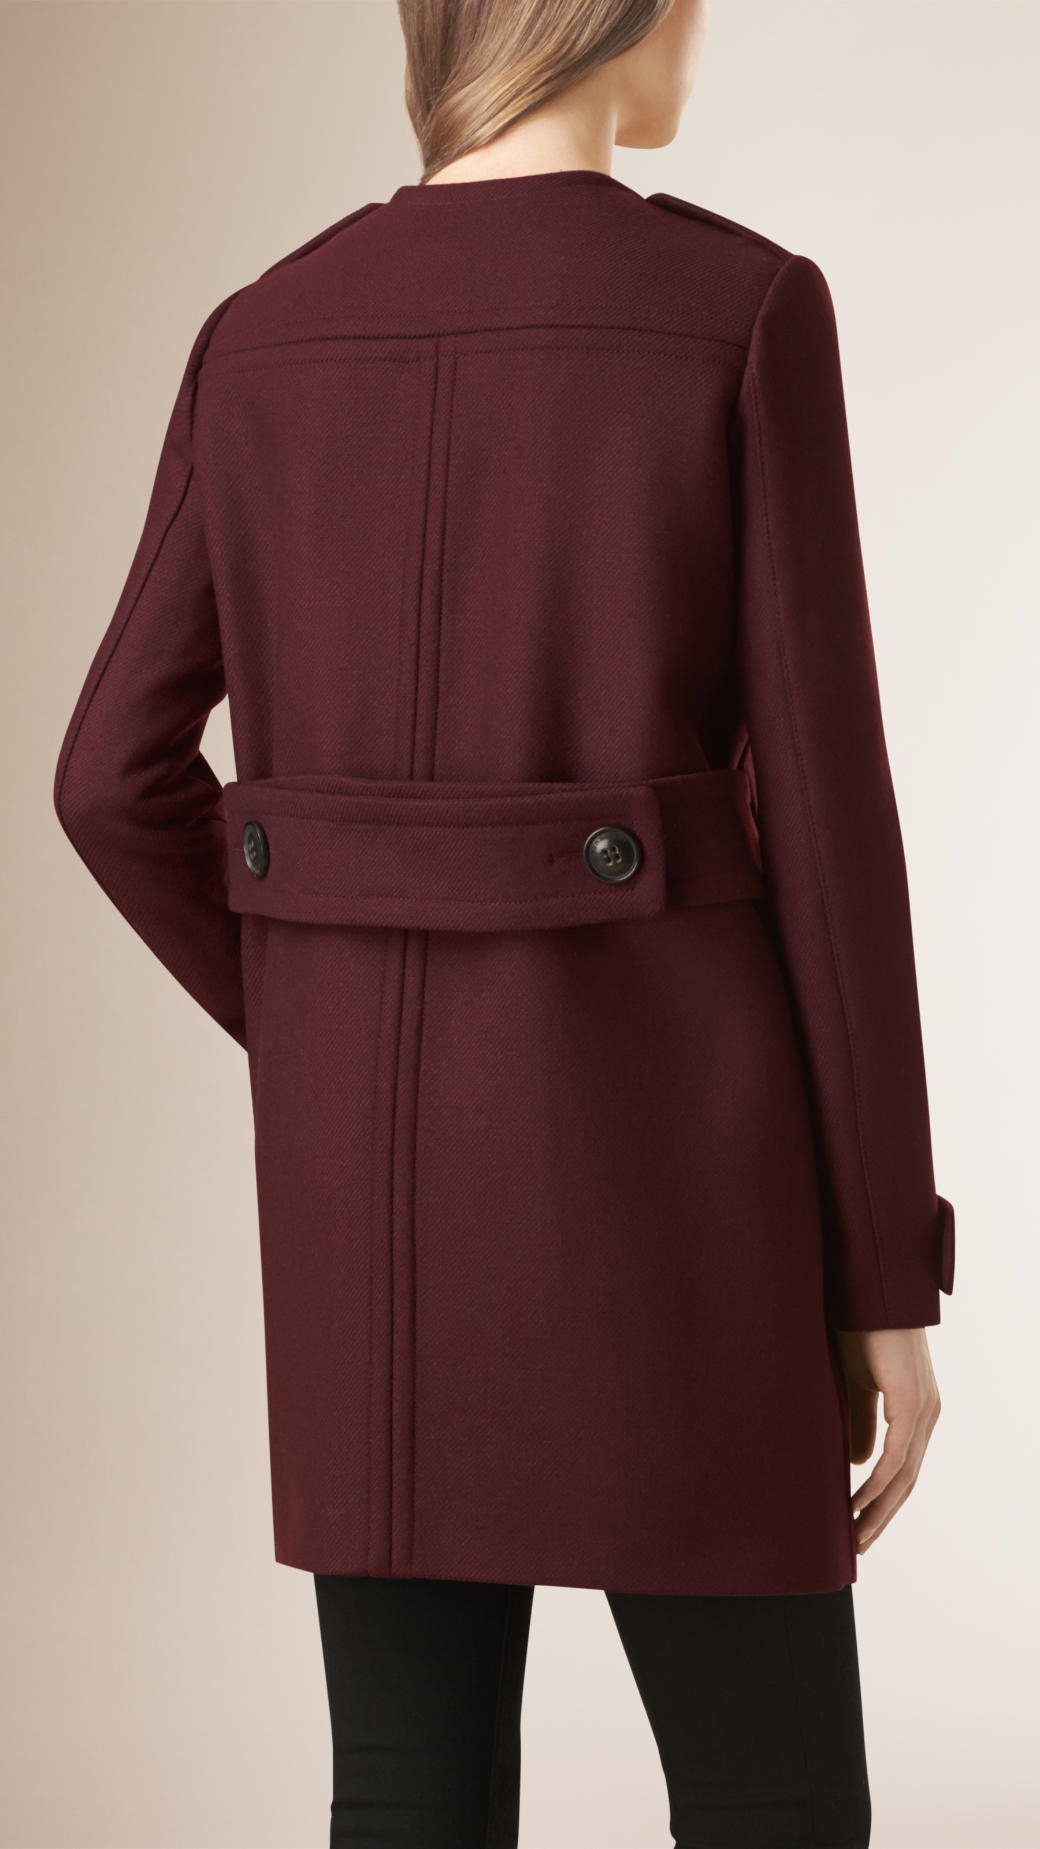 Lyst - Burberry Collarless Wool Blend Coat in Red